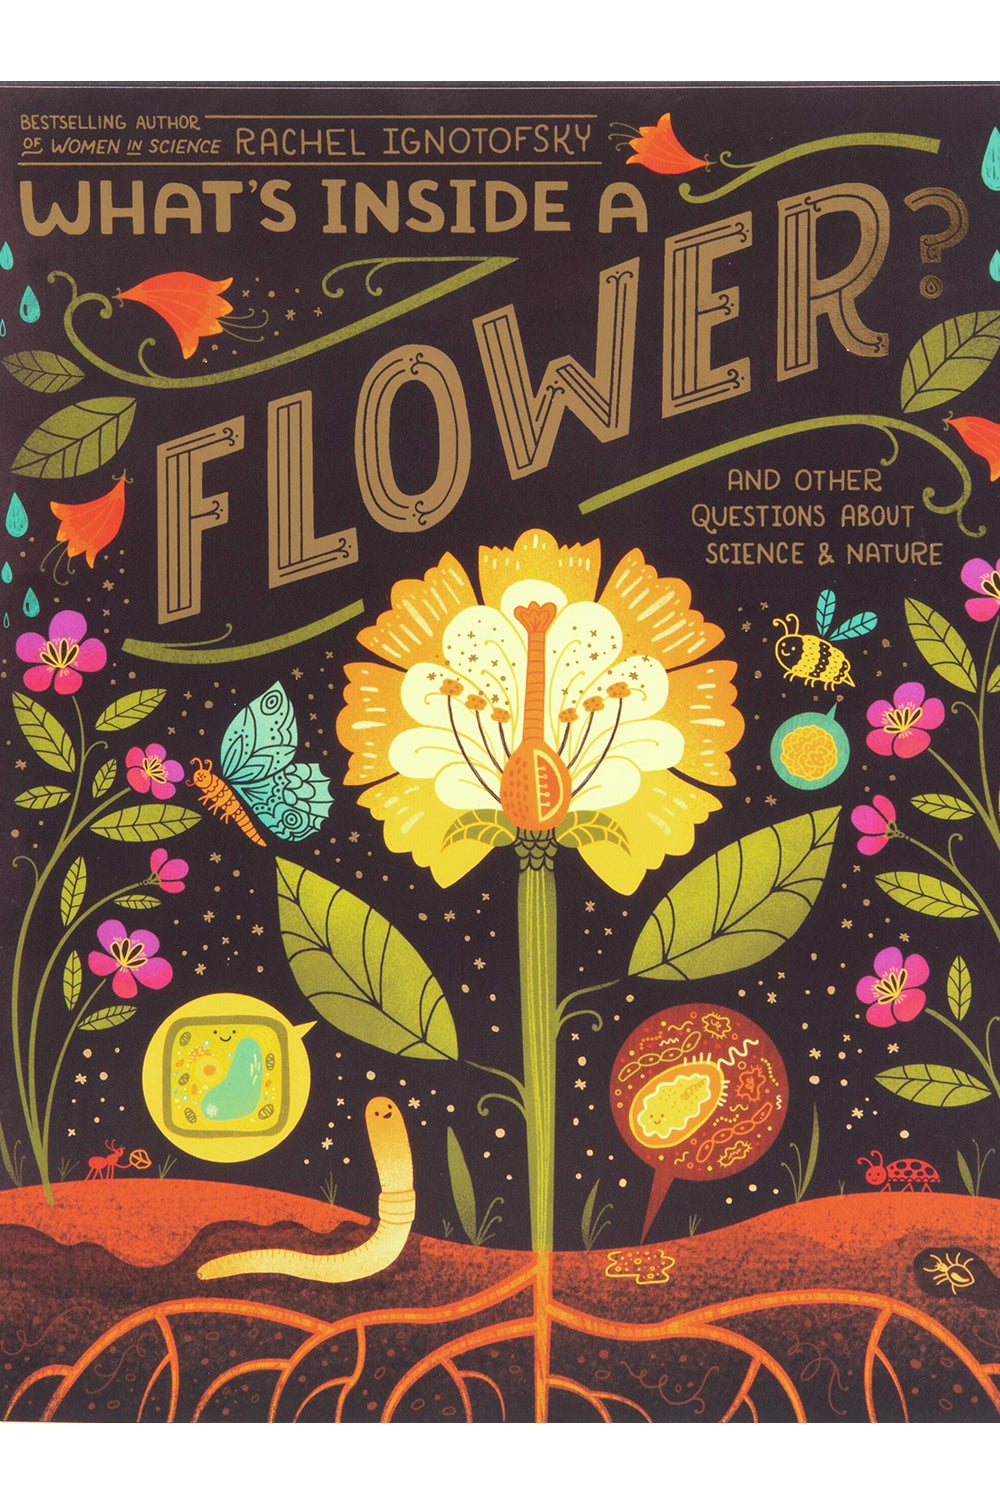 What's Inside a Flower? by Rachel Ignotofsky